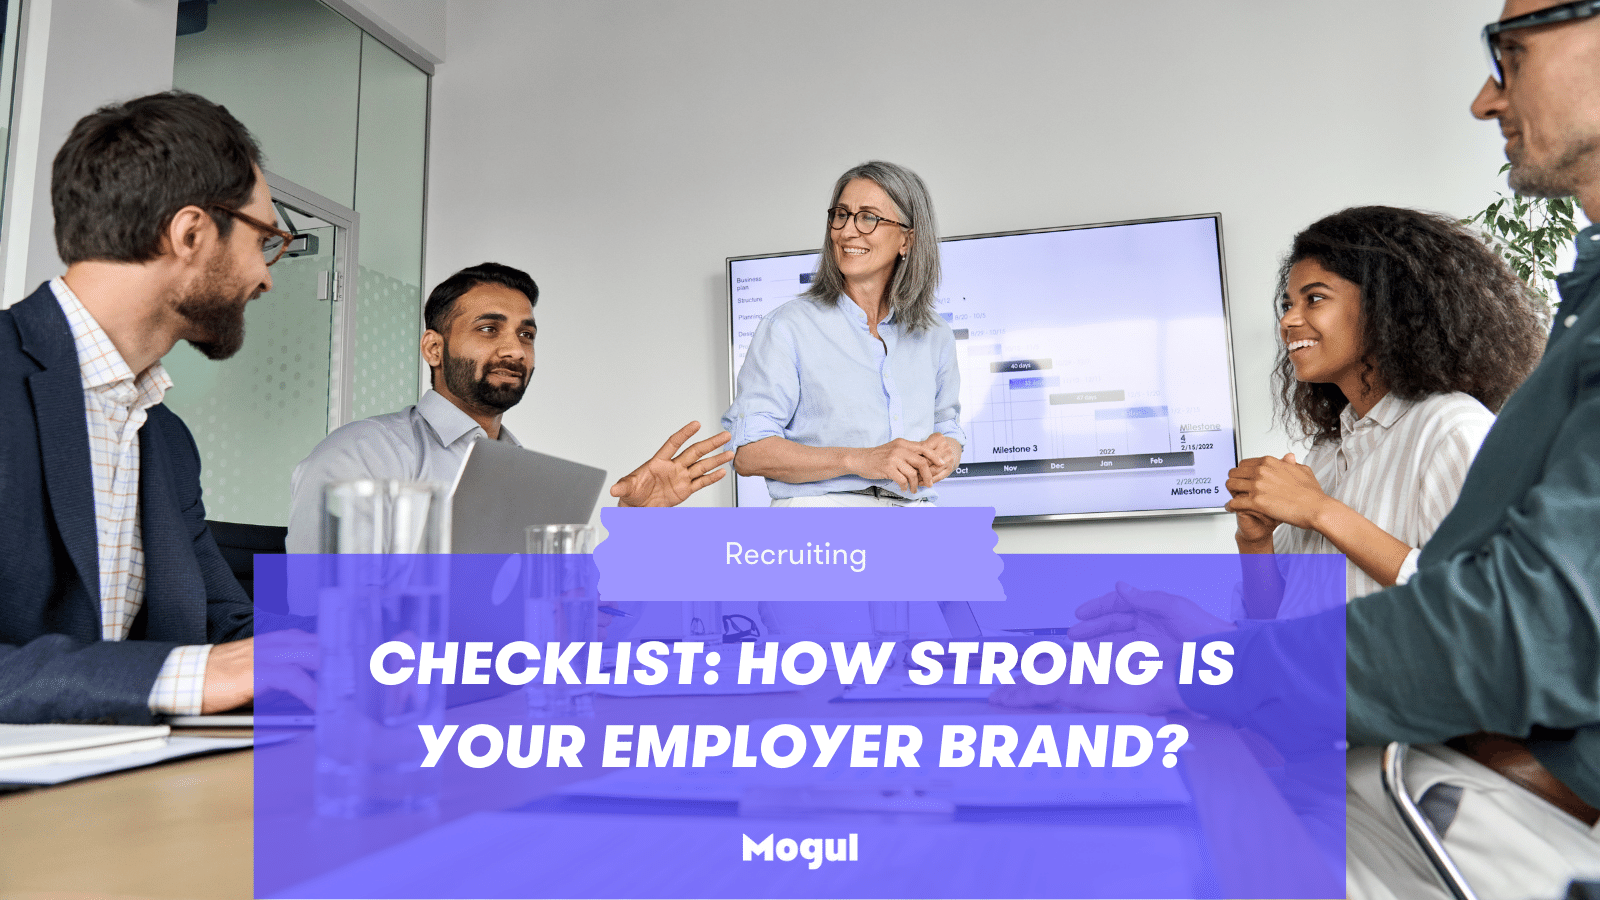 How Strong Is Your Employer Brand? Checklist